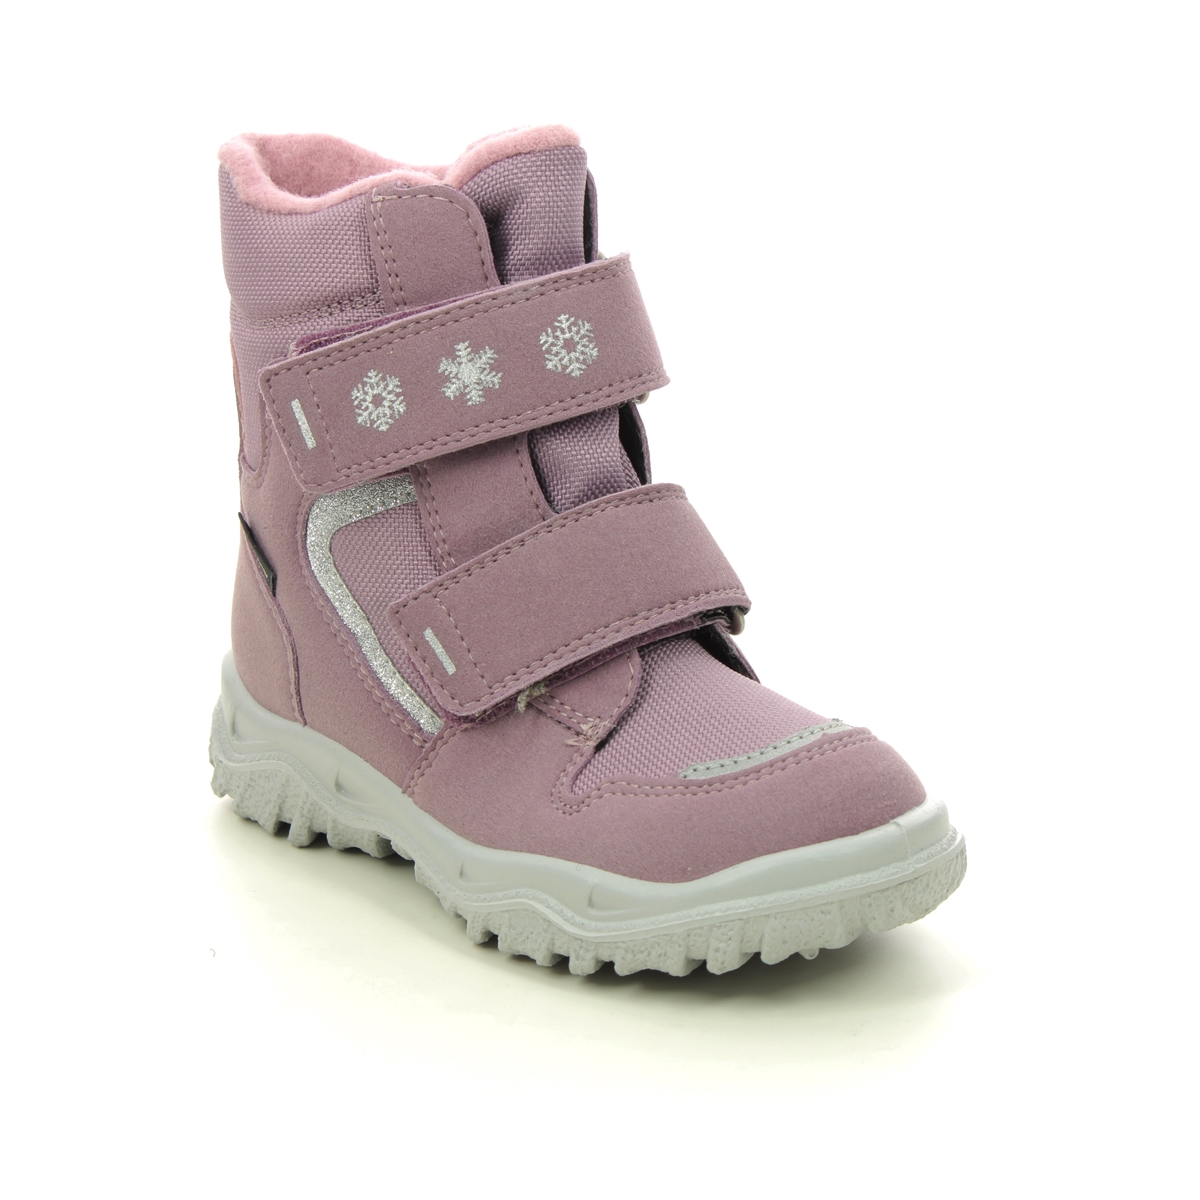 Superfit Husky  Inf Gtx Pink Leather Kids Toddler Girls Boots 1000045-8510 In Size 25 In Plain Pink Leather For kids